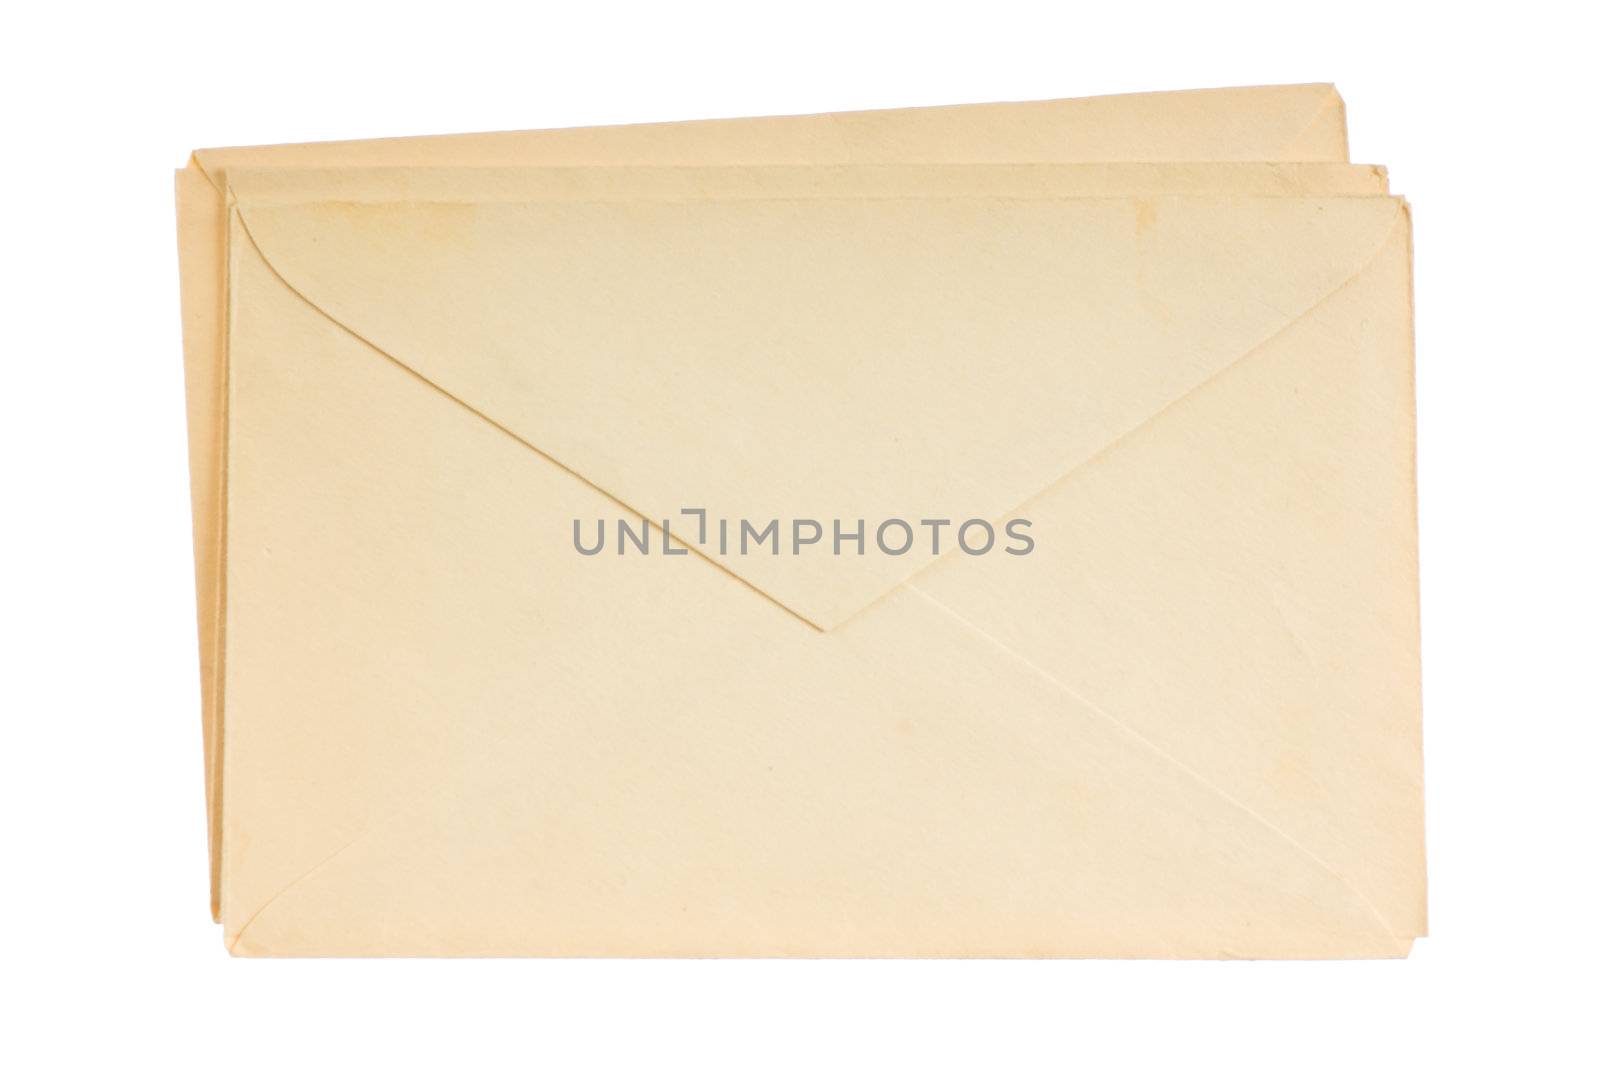 envelopes for letters isolated on white background